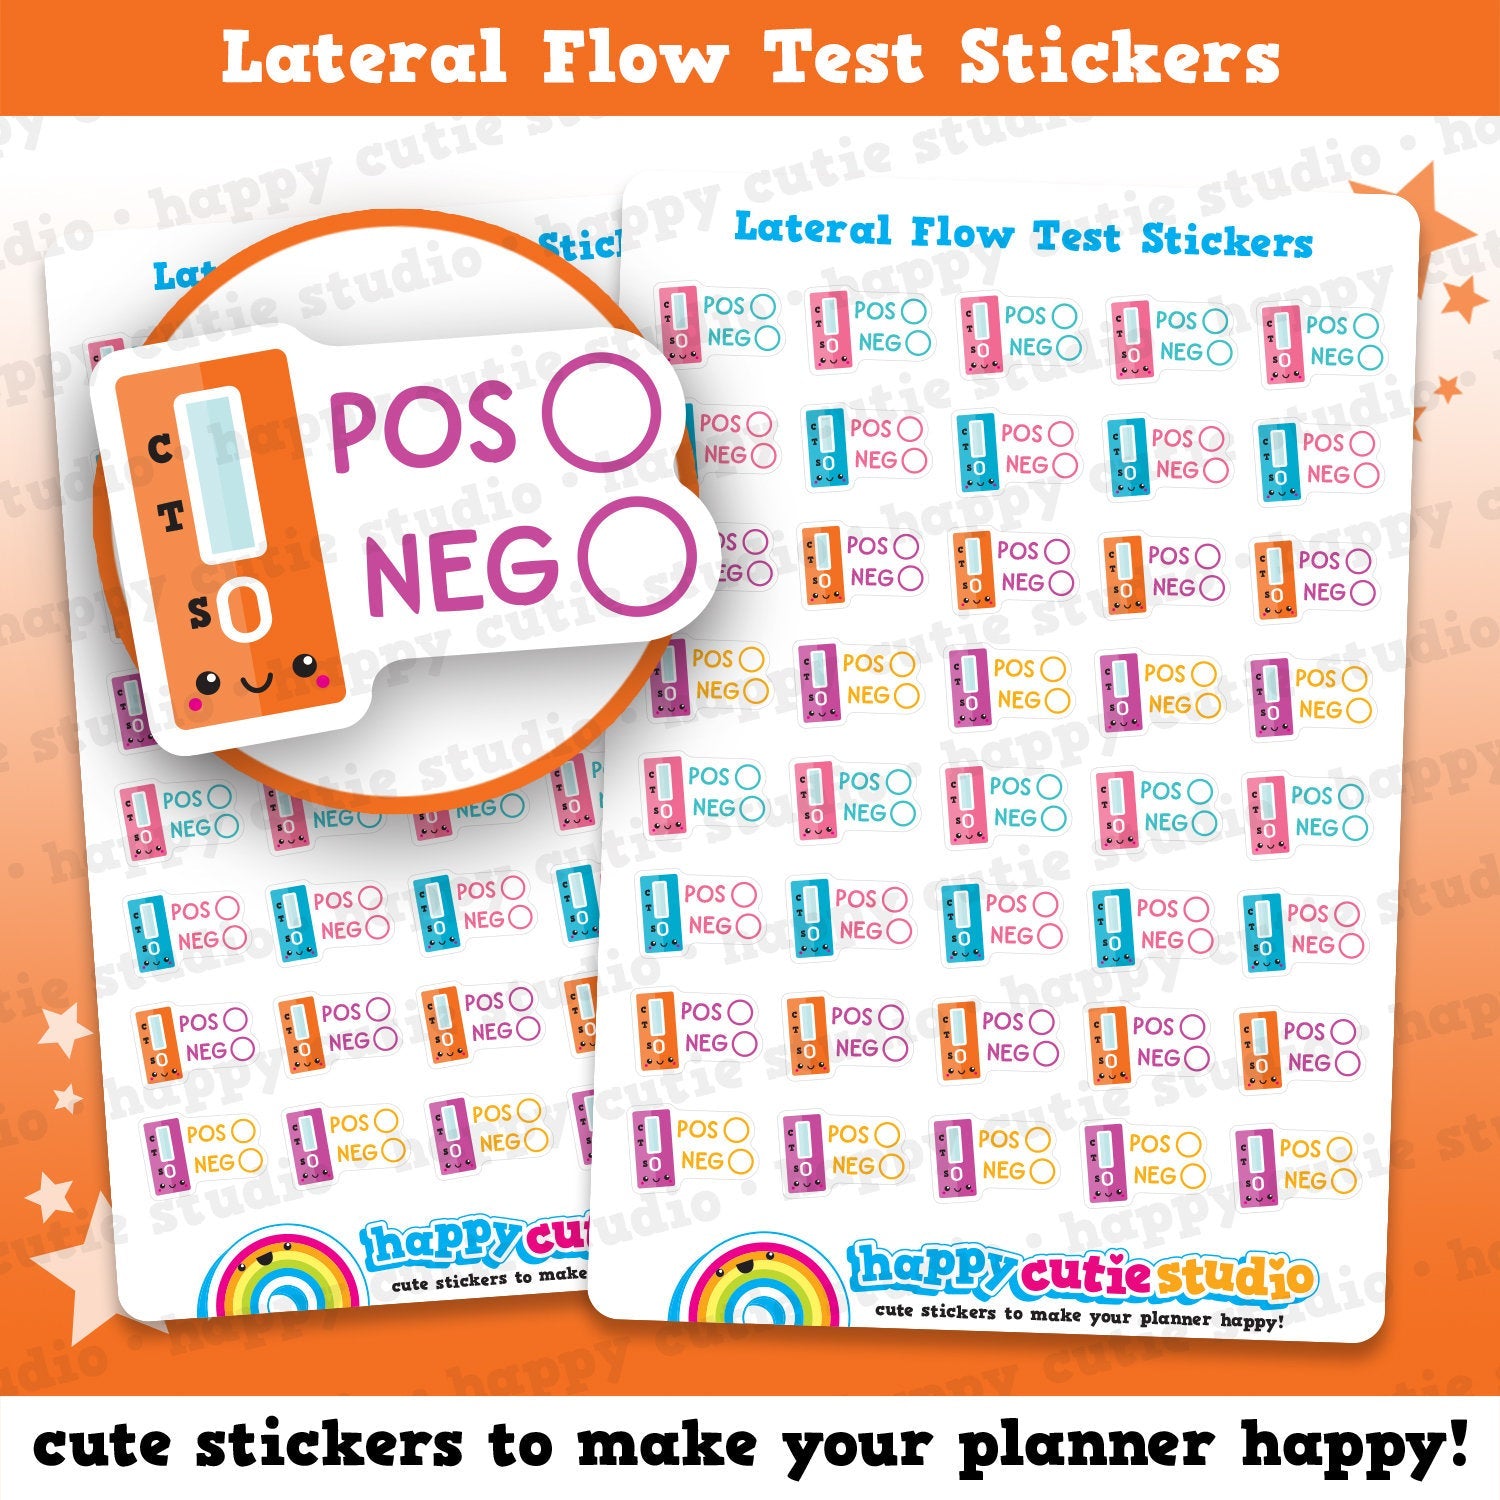 40 Cute Lateral Flow Test Planner Stickers